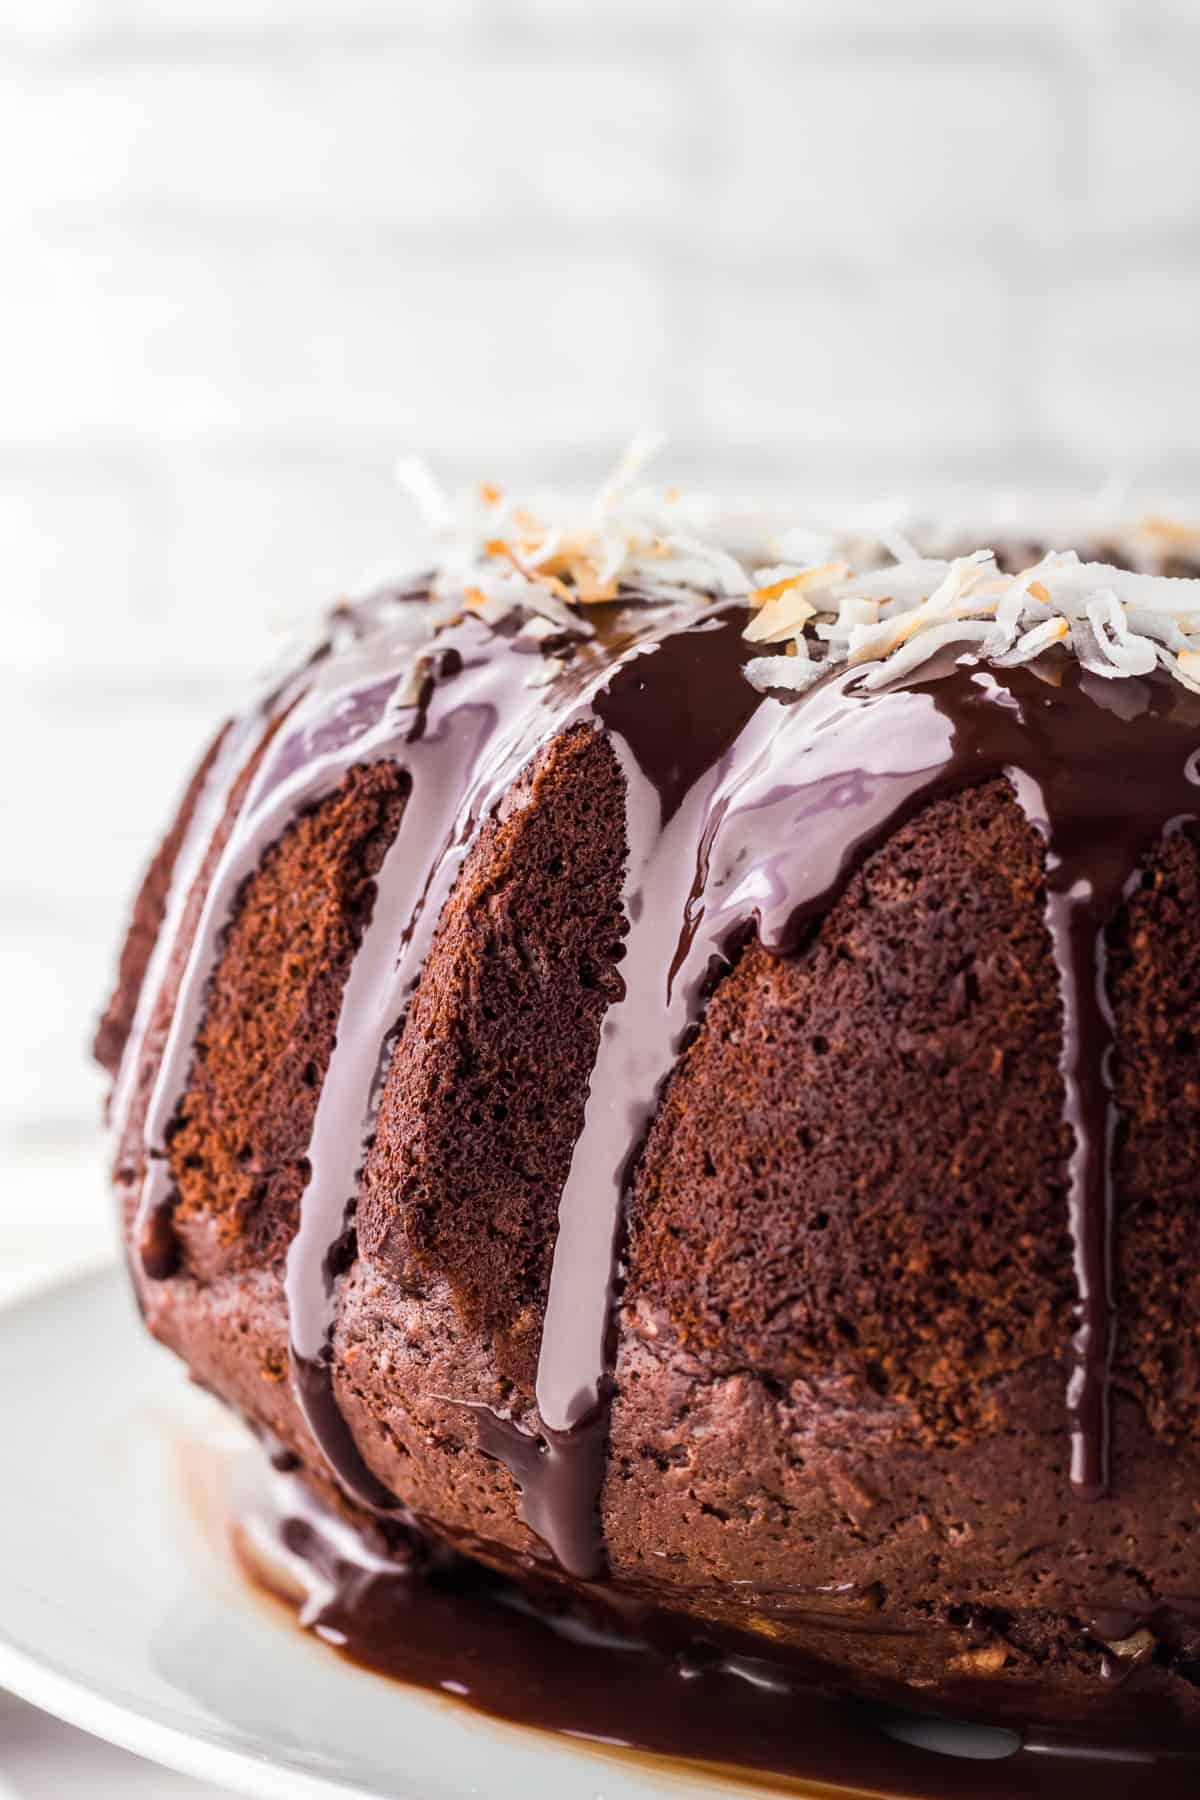 Side profile of chocolate coconut bundt cake with chocolate ganache dripping down the side and shredded coconut sprinkled over the top.